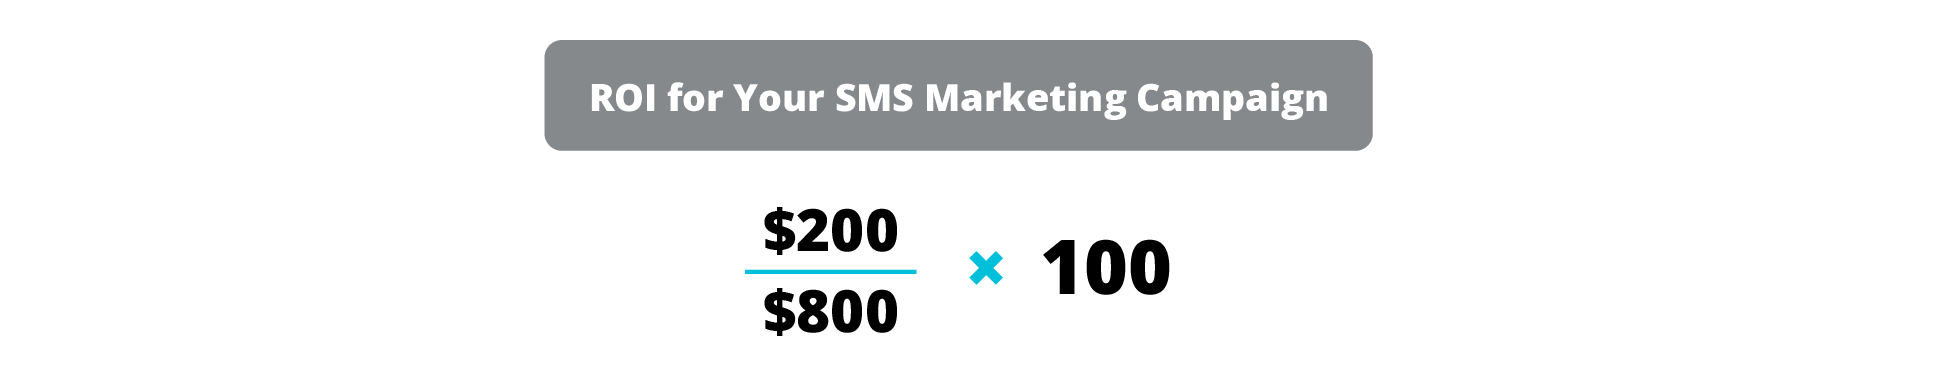 ROI for your SMS marketing campaign: ($200) / ($800) x 100